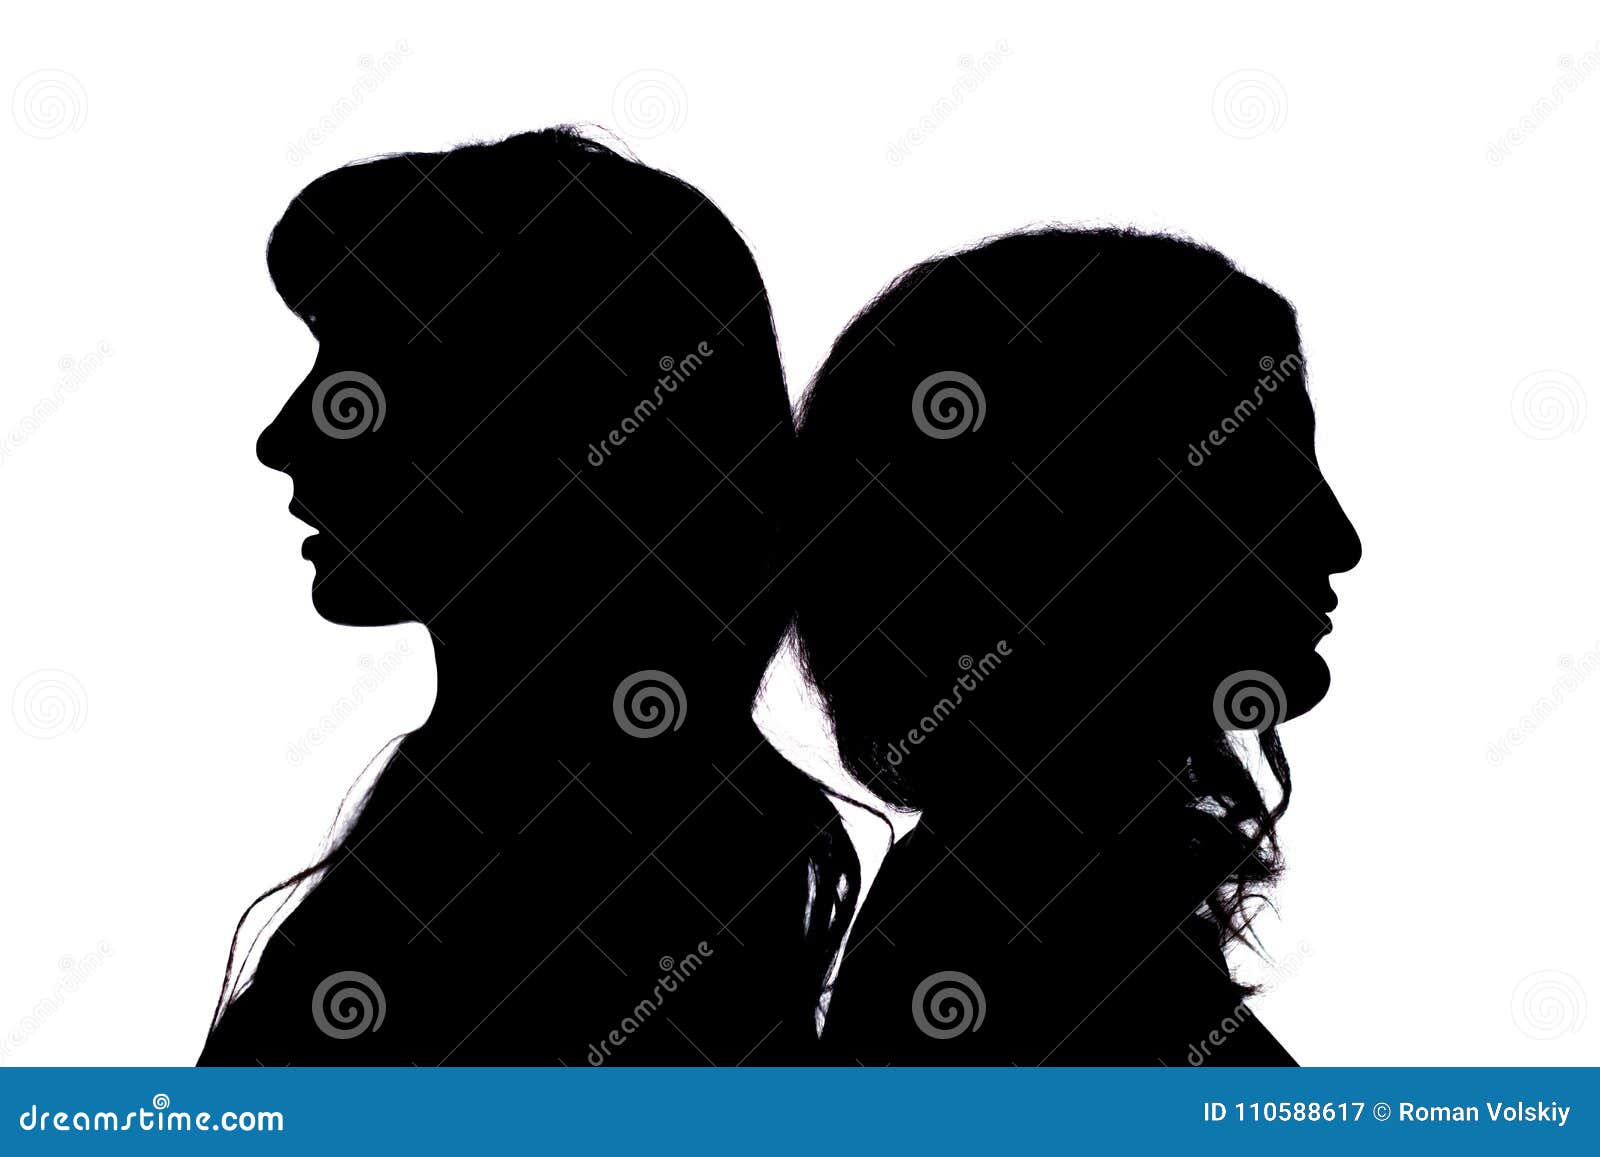 two girls silhouette back to back